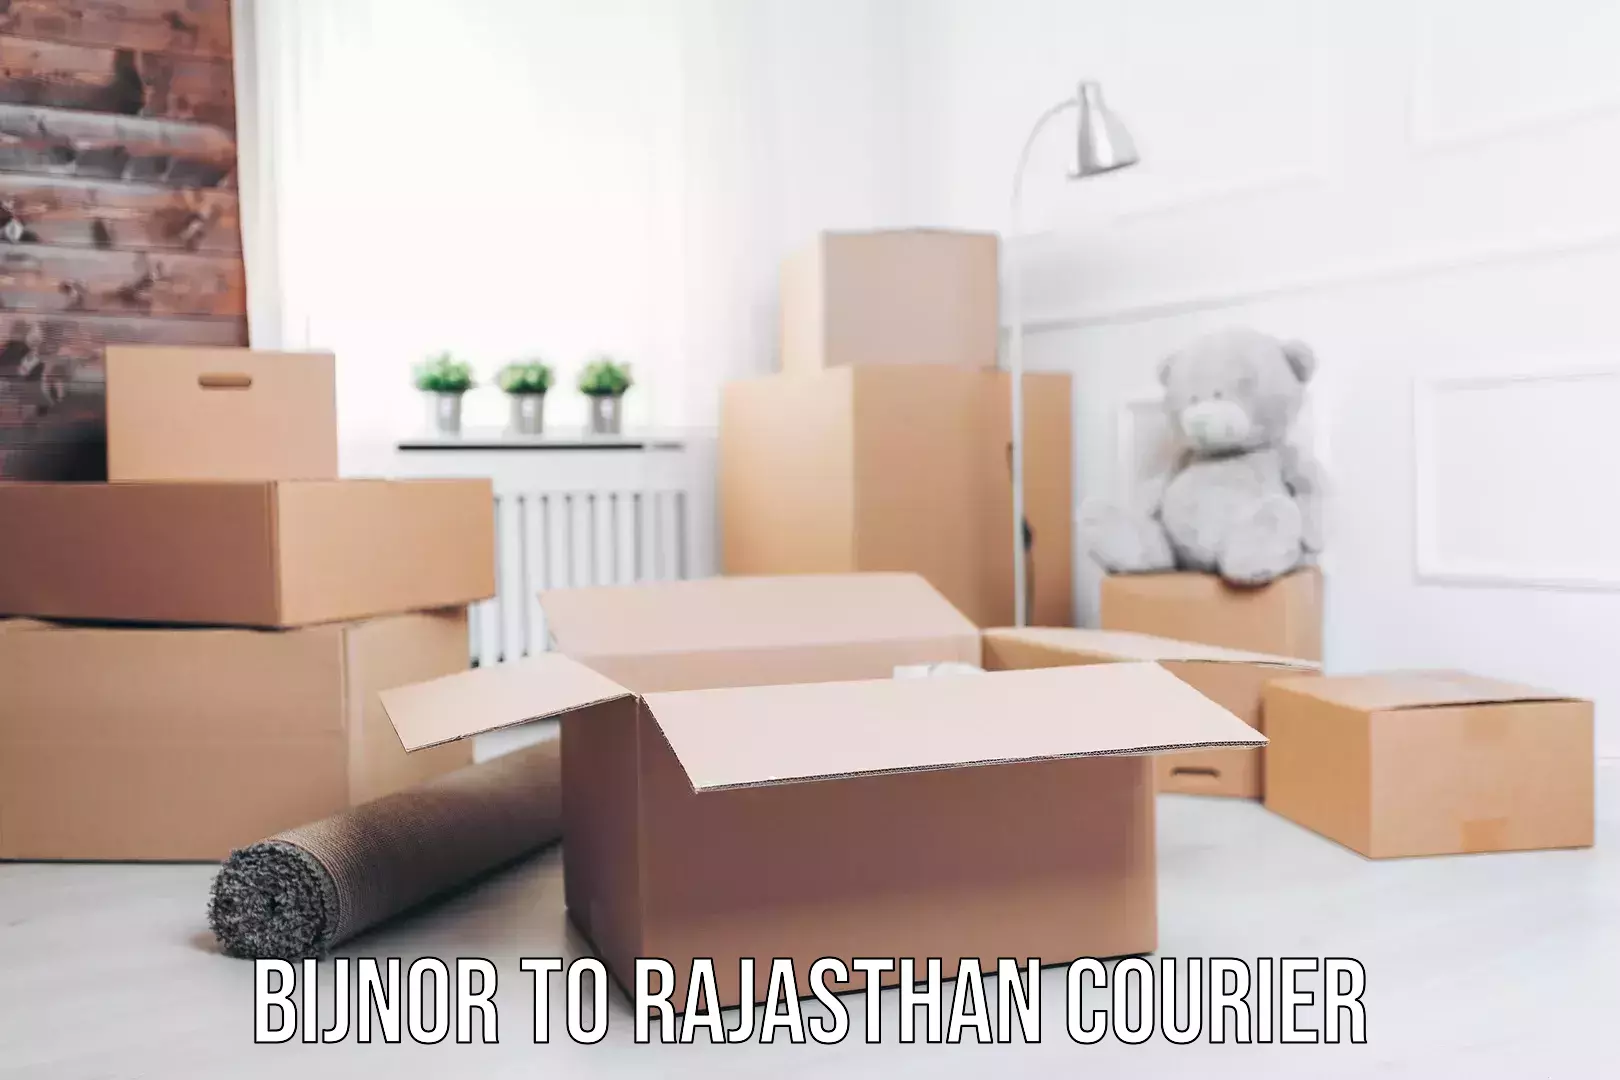 Courier service innovation Bijnor to Rajasthan